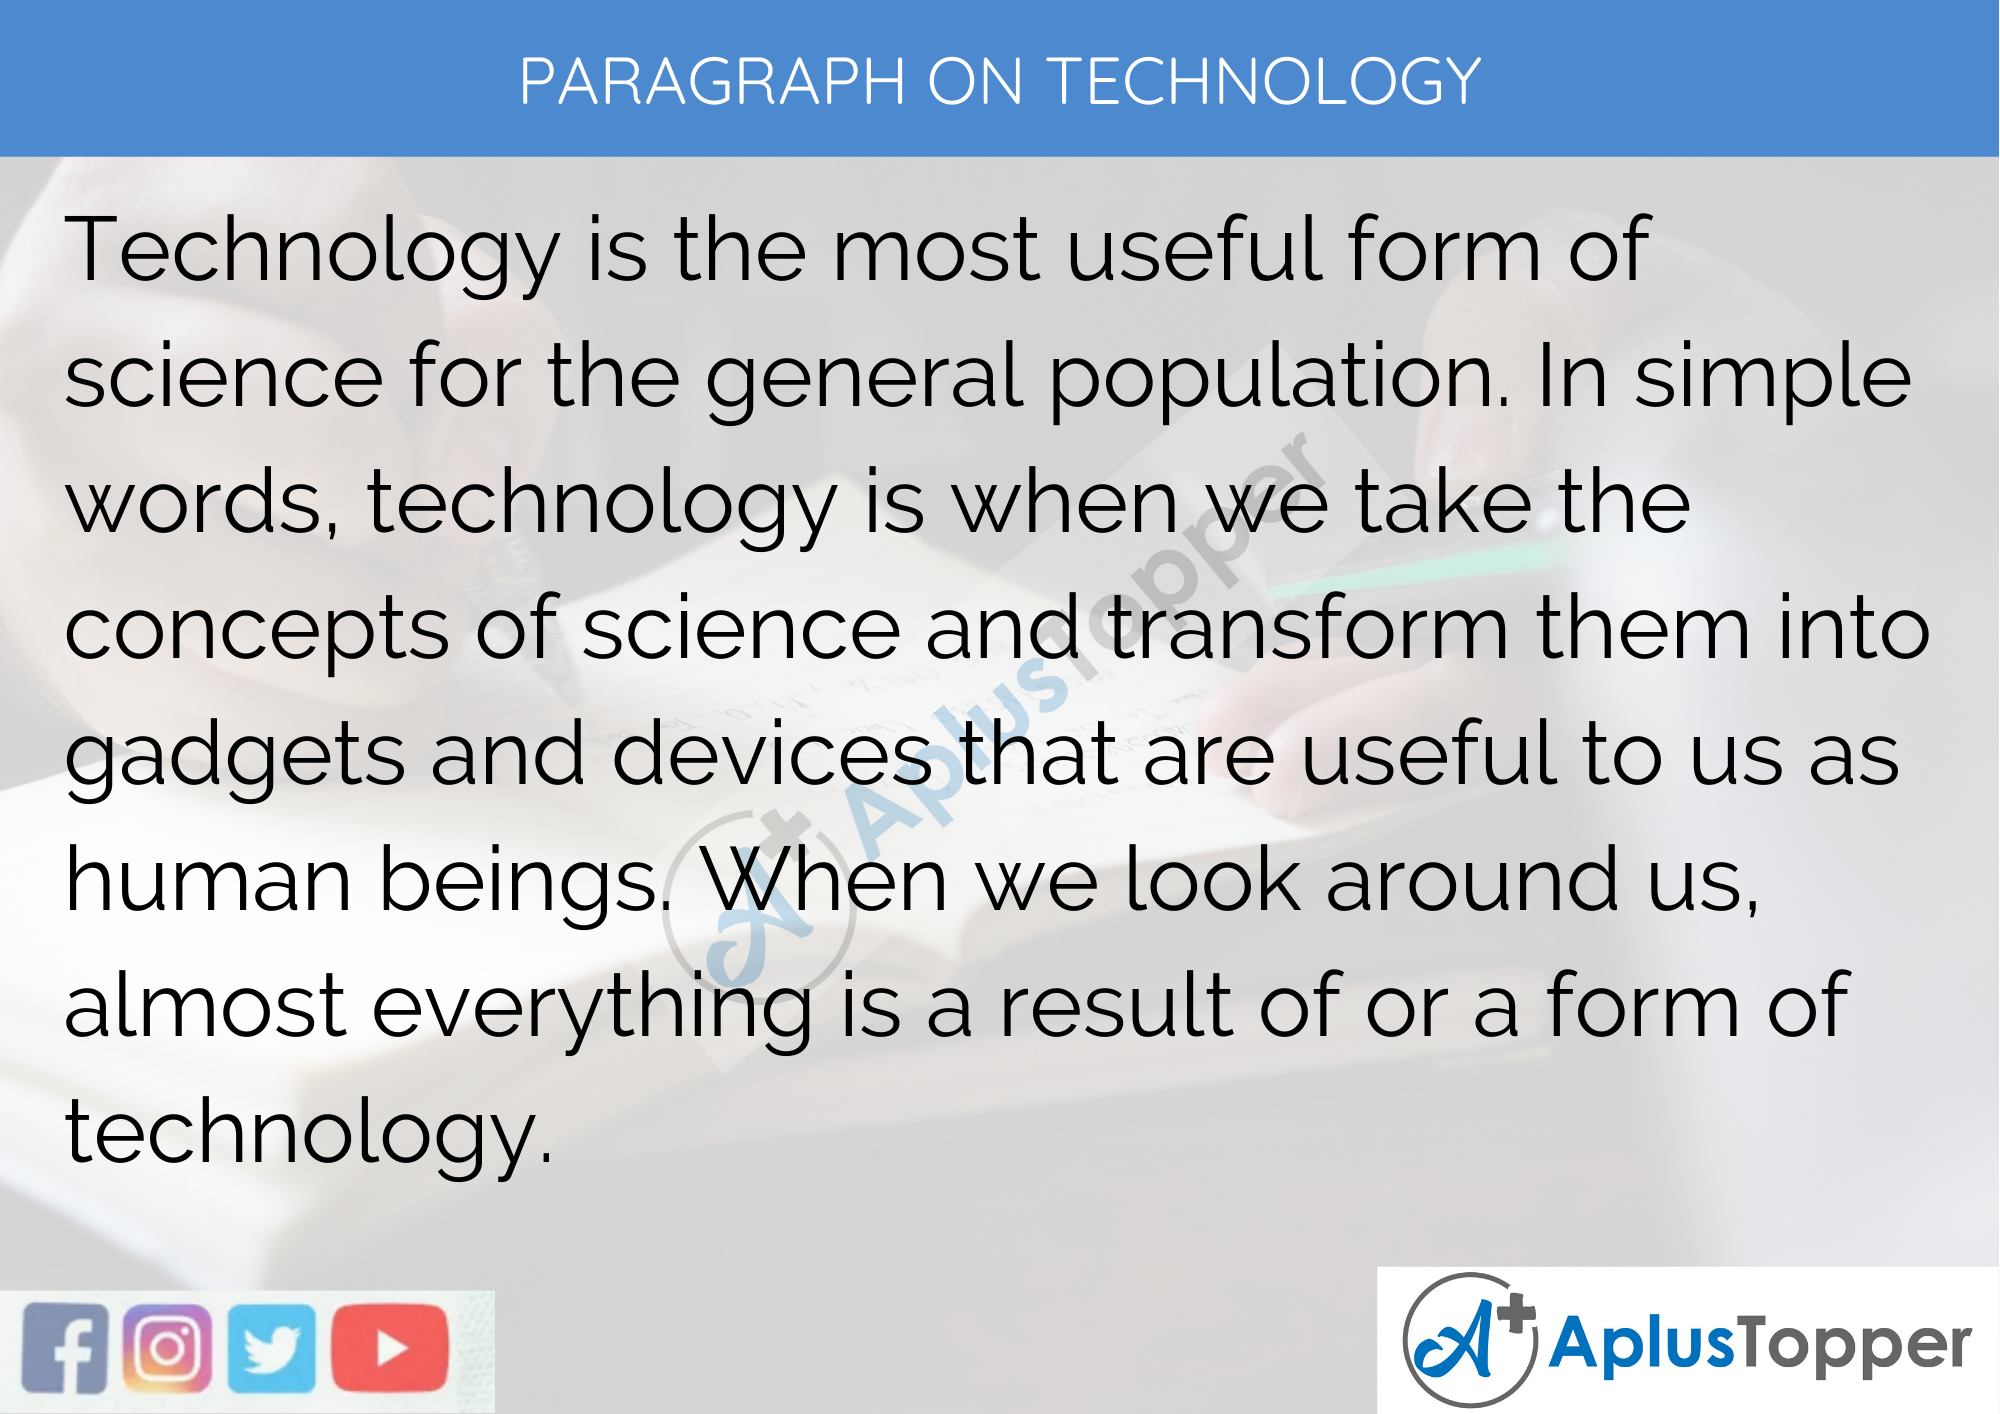 topic sentence for technology